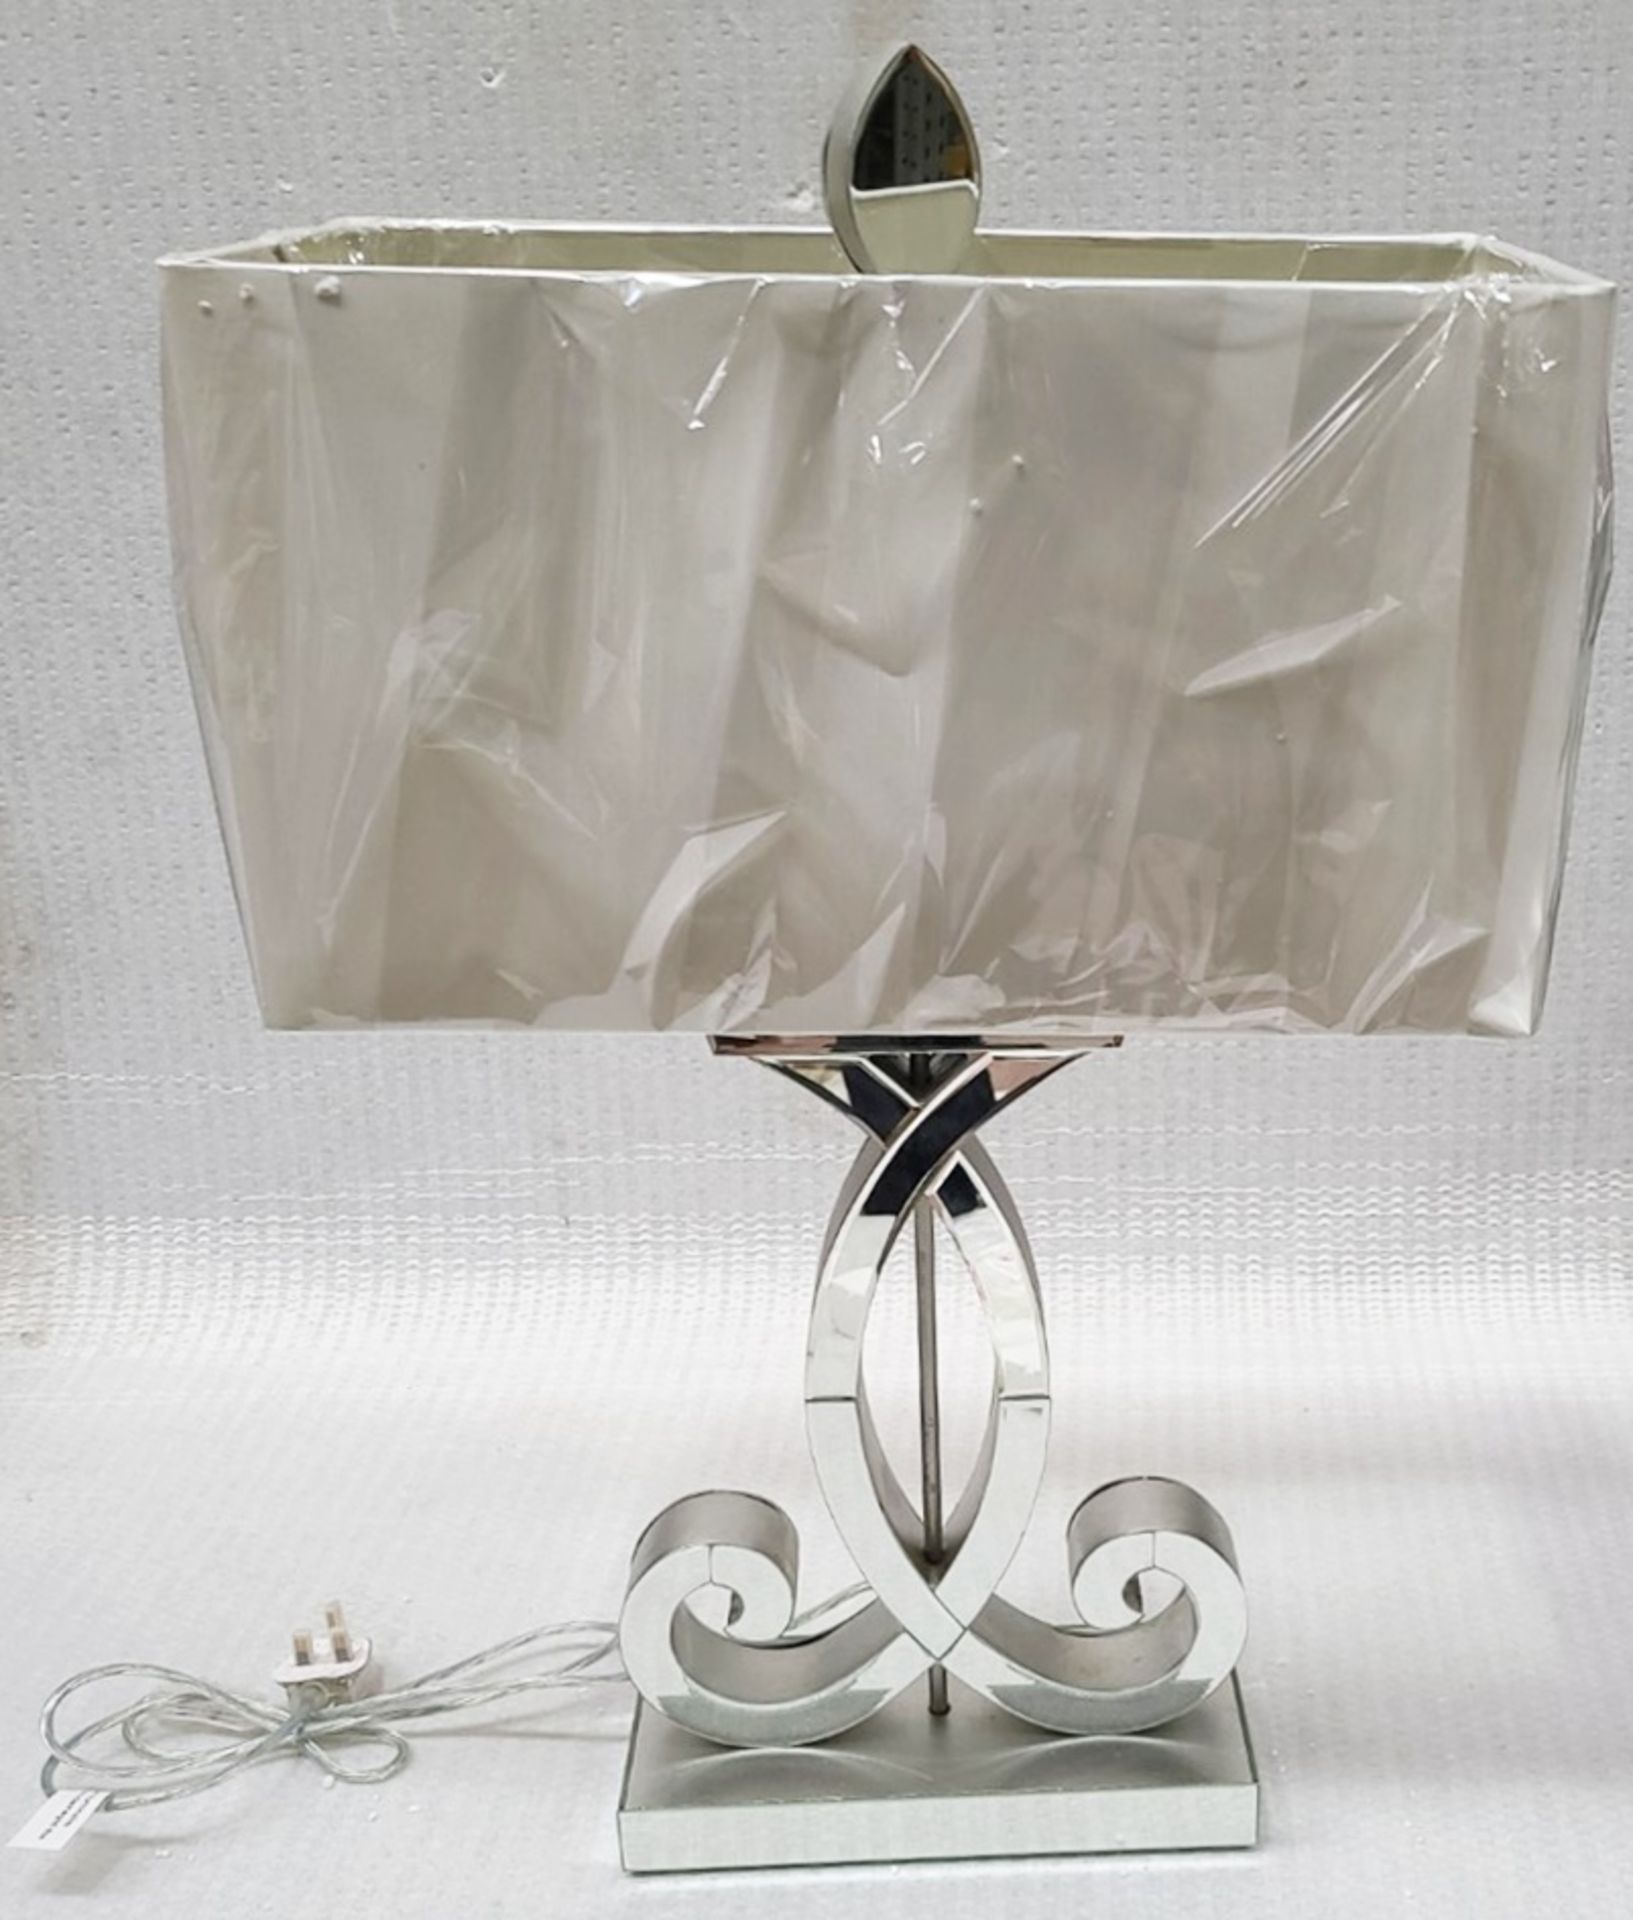 1 x BLUESUNTREE Mirrored Curl Lamp With Dulled Silver Finish Edges With Rectangular Shade 82cm - Image 6 of 12